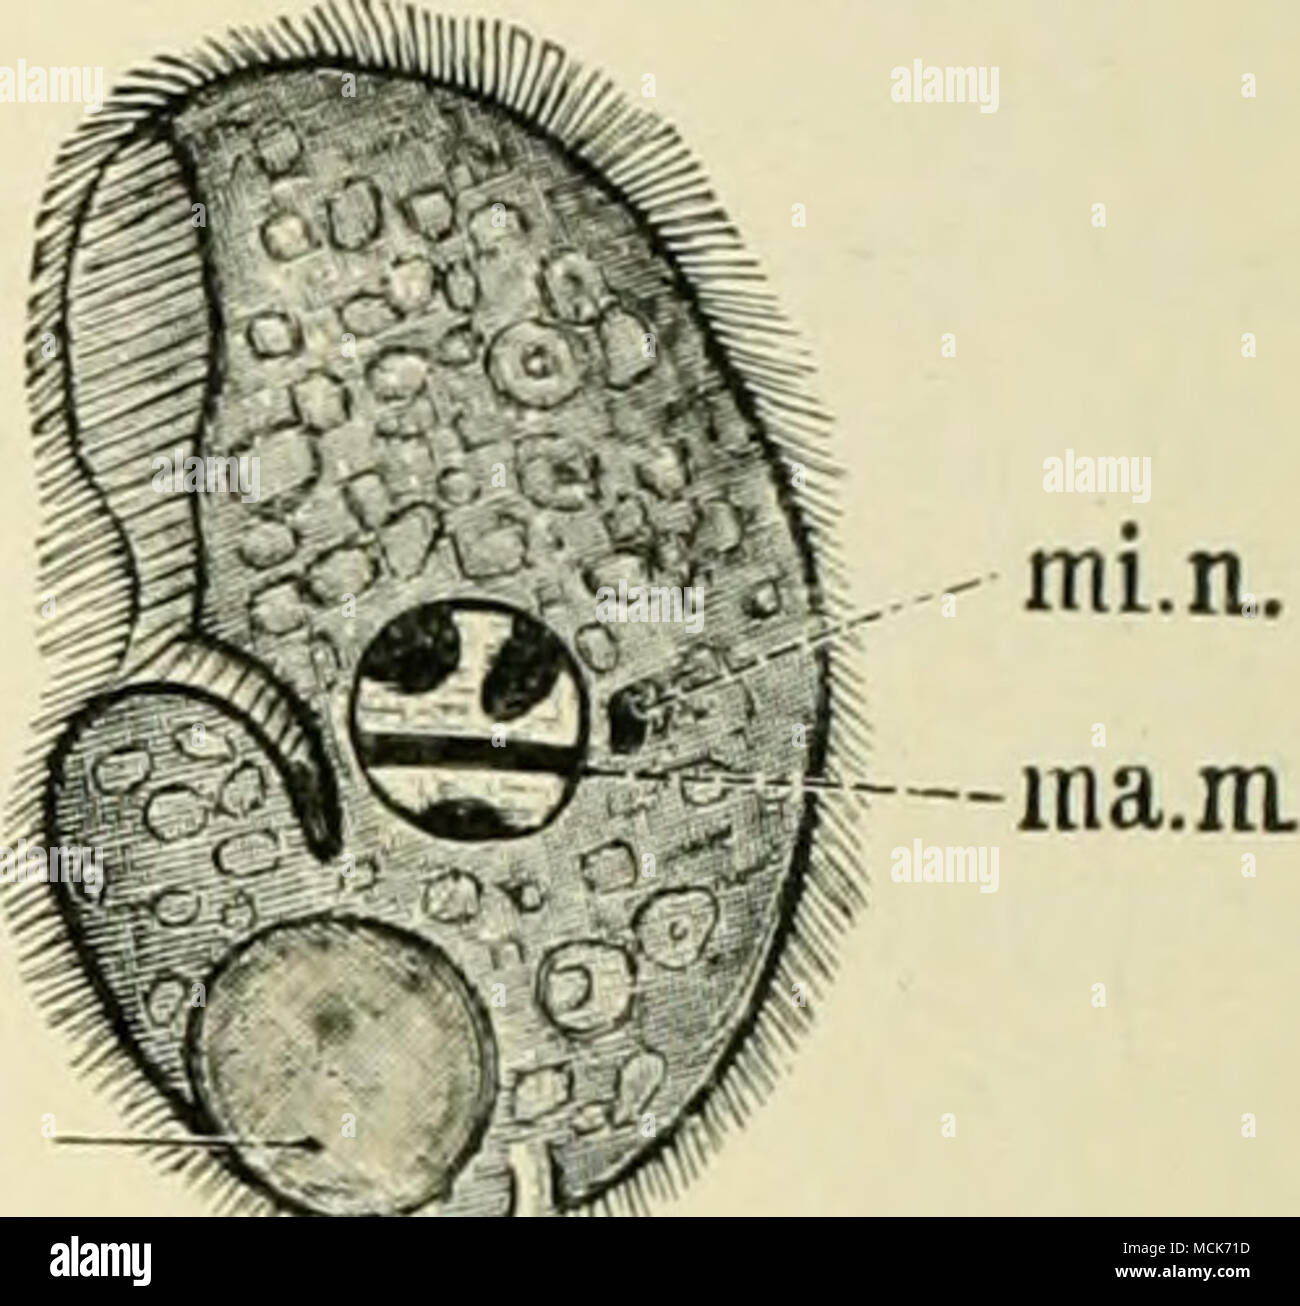 . Fig. 30.—Balantidium Minutum. Fig. 31.—Nyctotherus Faba. n, nucleus; cv, contractile vacuole. (After mi.n, micro nucleus; ma.m, macronucleus. Schaudinn.) (After Schaudinn.) which follow. Vorticelli, which, according to Lindner, are said to infest man, cannot yet be recognized as parasitic structures. This embraces the principal protozoa which occur in man. We now come to the more highly-organized class, the plathelminthes or flat-worms. To this group, which embraces the two classes of trematodes, or sucking-worms, and cestodes, or tape-worms, belong the &quot; vermes intestinalis &quot; of t Stock Photo